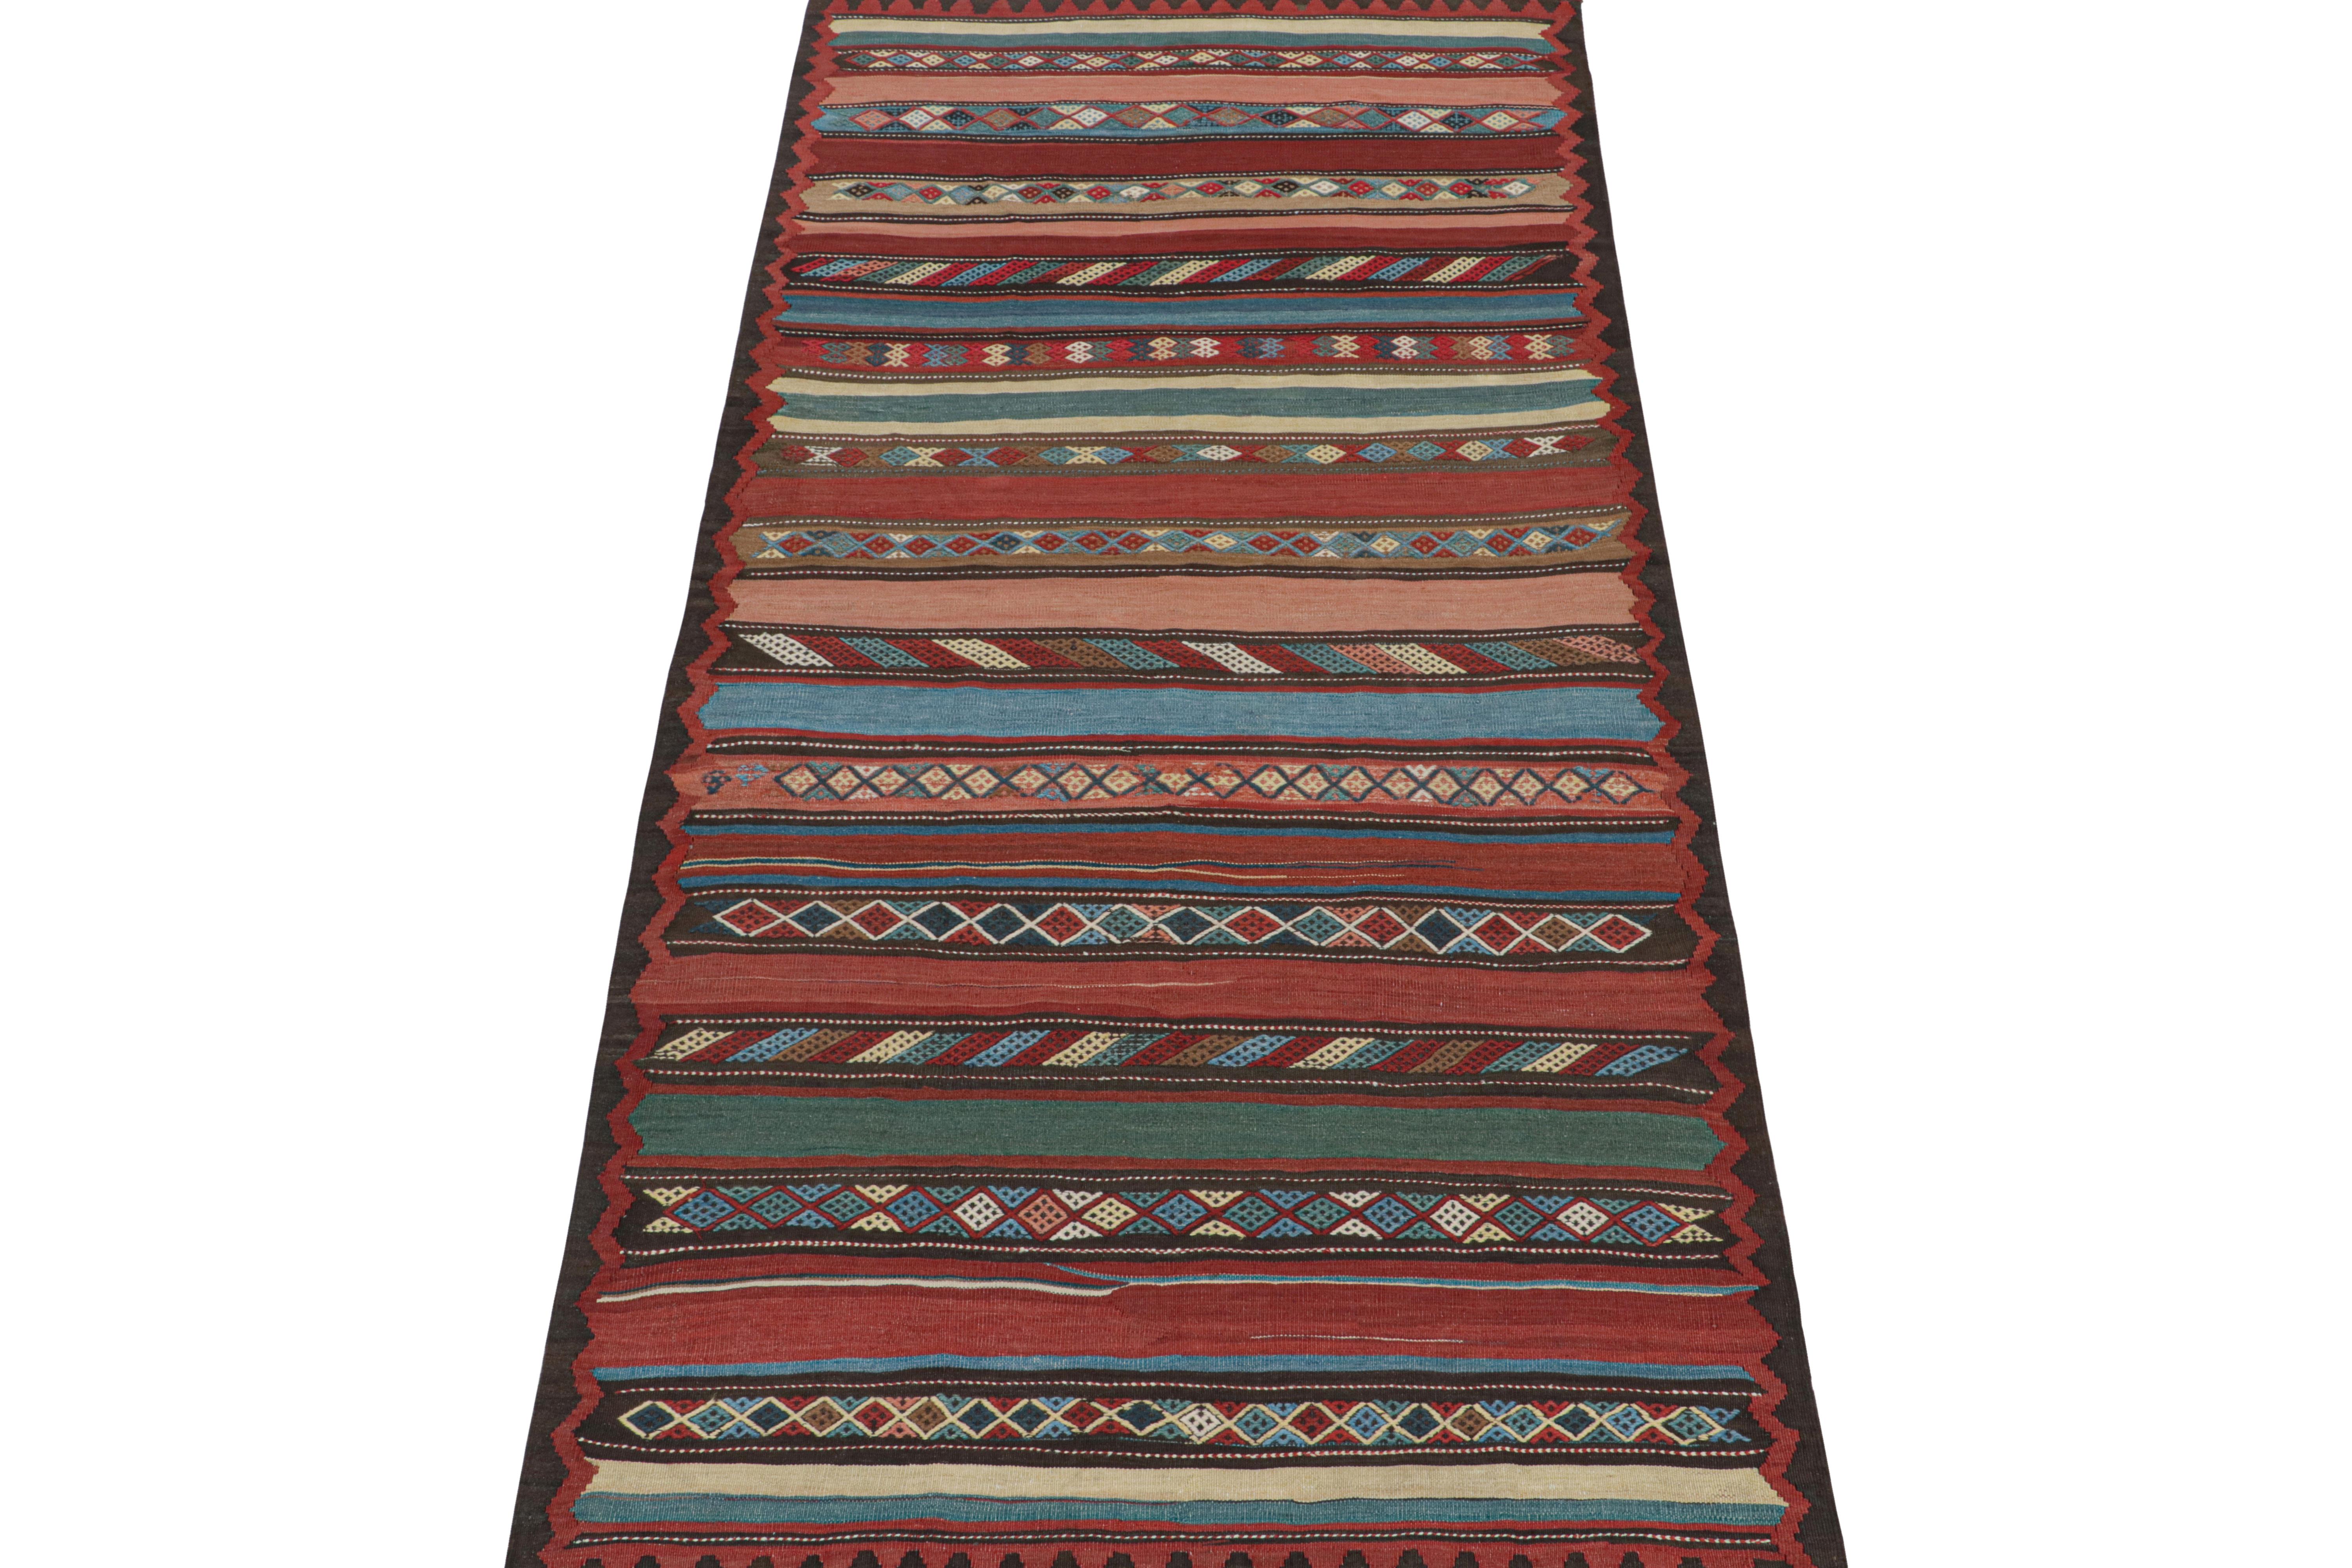 This vintage 5x7 Persian Kilim is believed to be a Shahsavan tribal rug. Handwoven in wool, it originates circa 1950-1960 and enjoys a polychromatic colorway with stripes and geometric patterns. 

Further on the Design:

In its many rich and